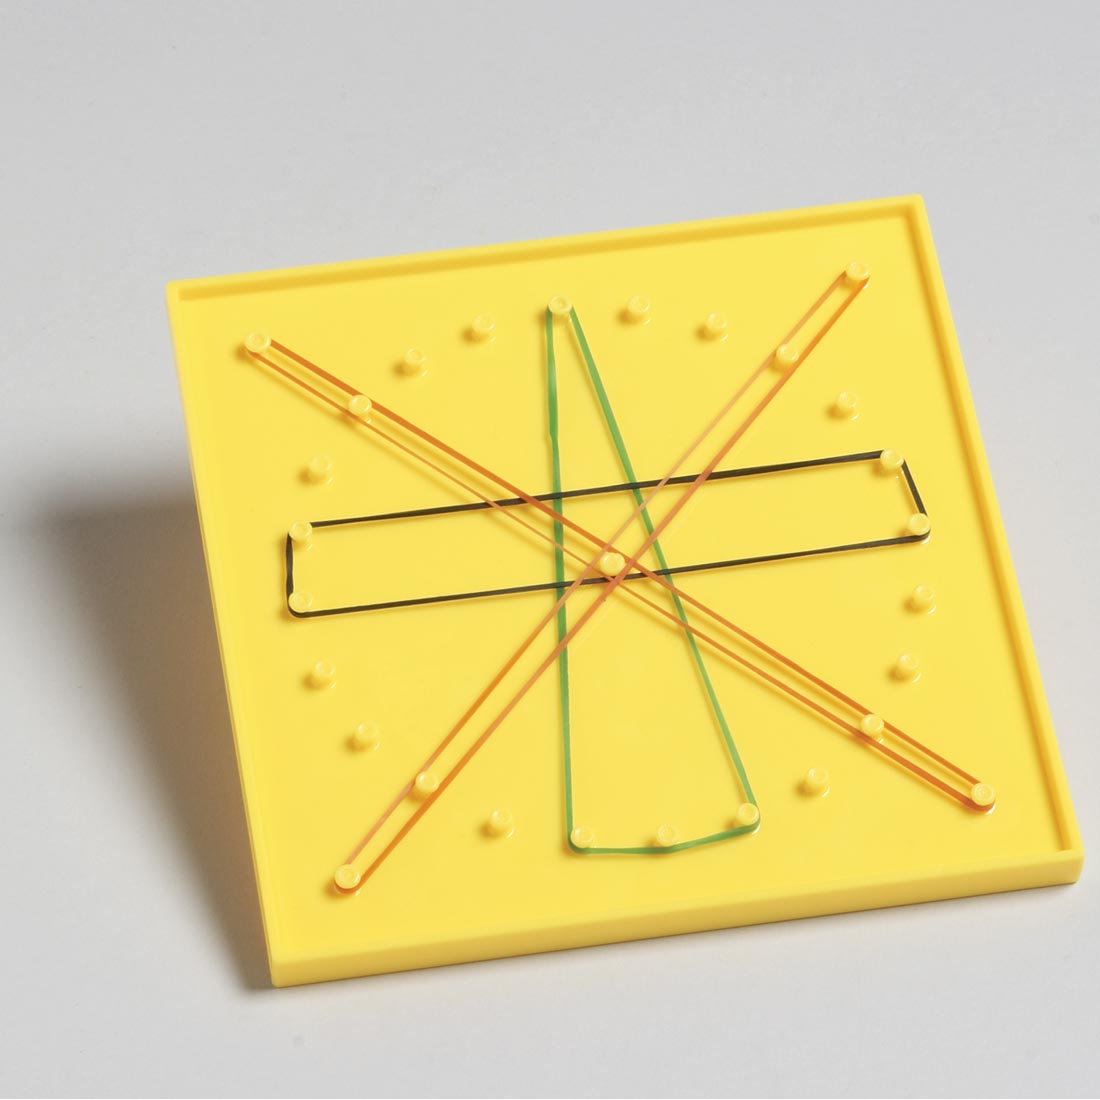 Didax Geoboard with Rubber Bands